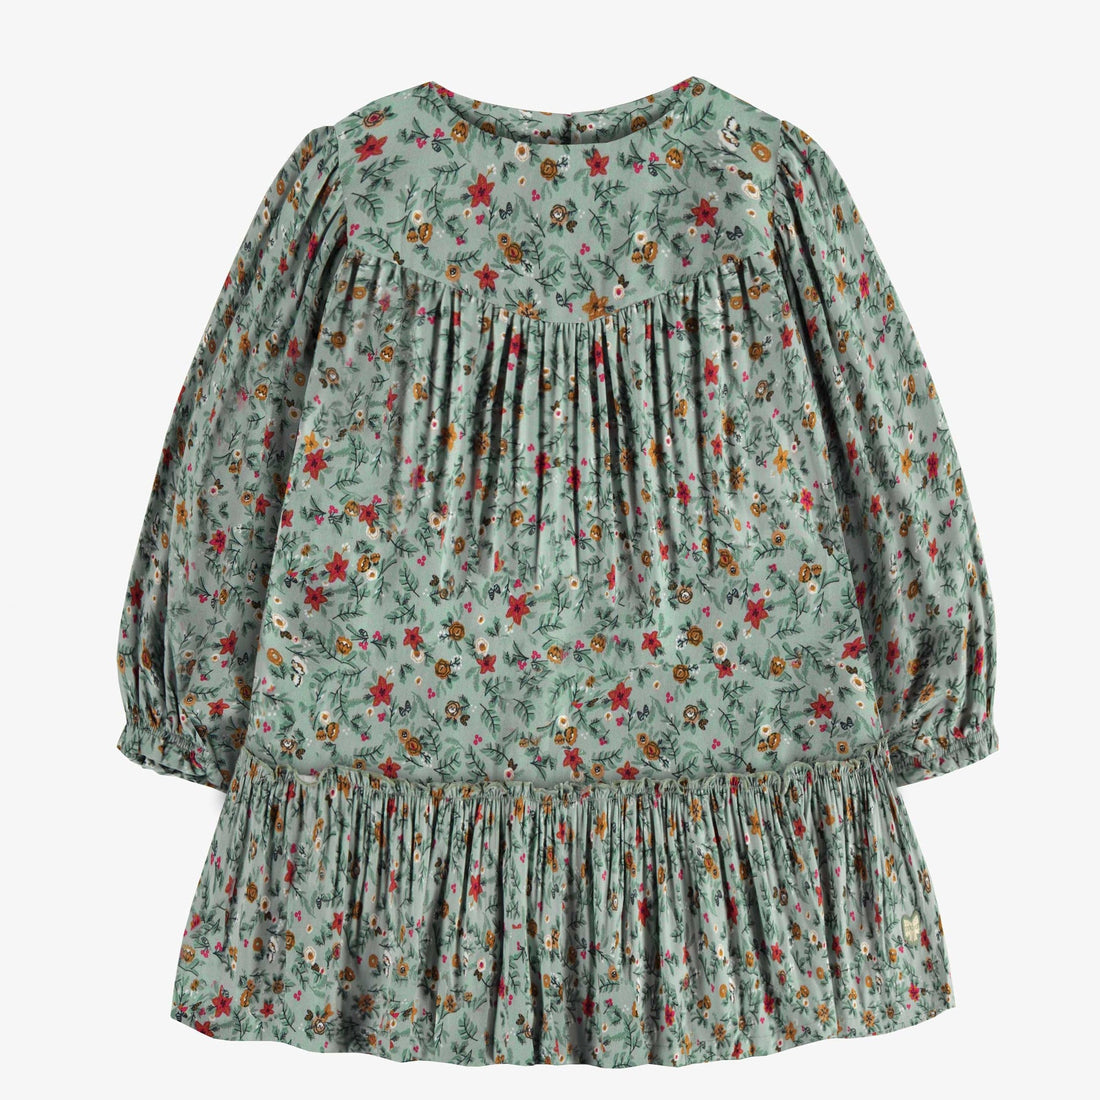 GREEN LONG SLEEVES DRESS WITH FLORAL PATTERN IN VISCOSE, CHILD